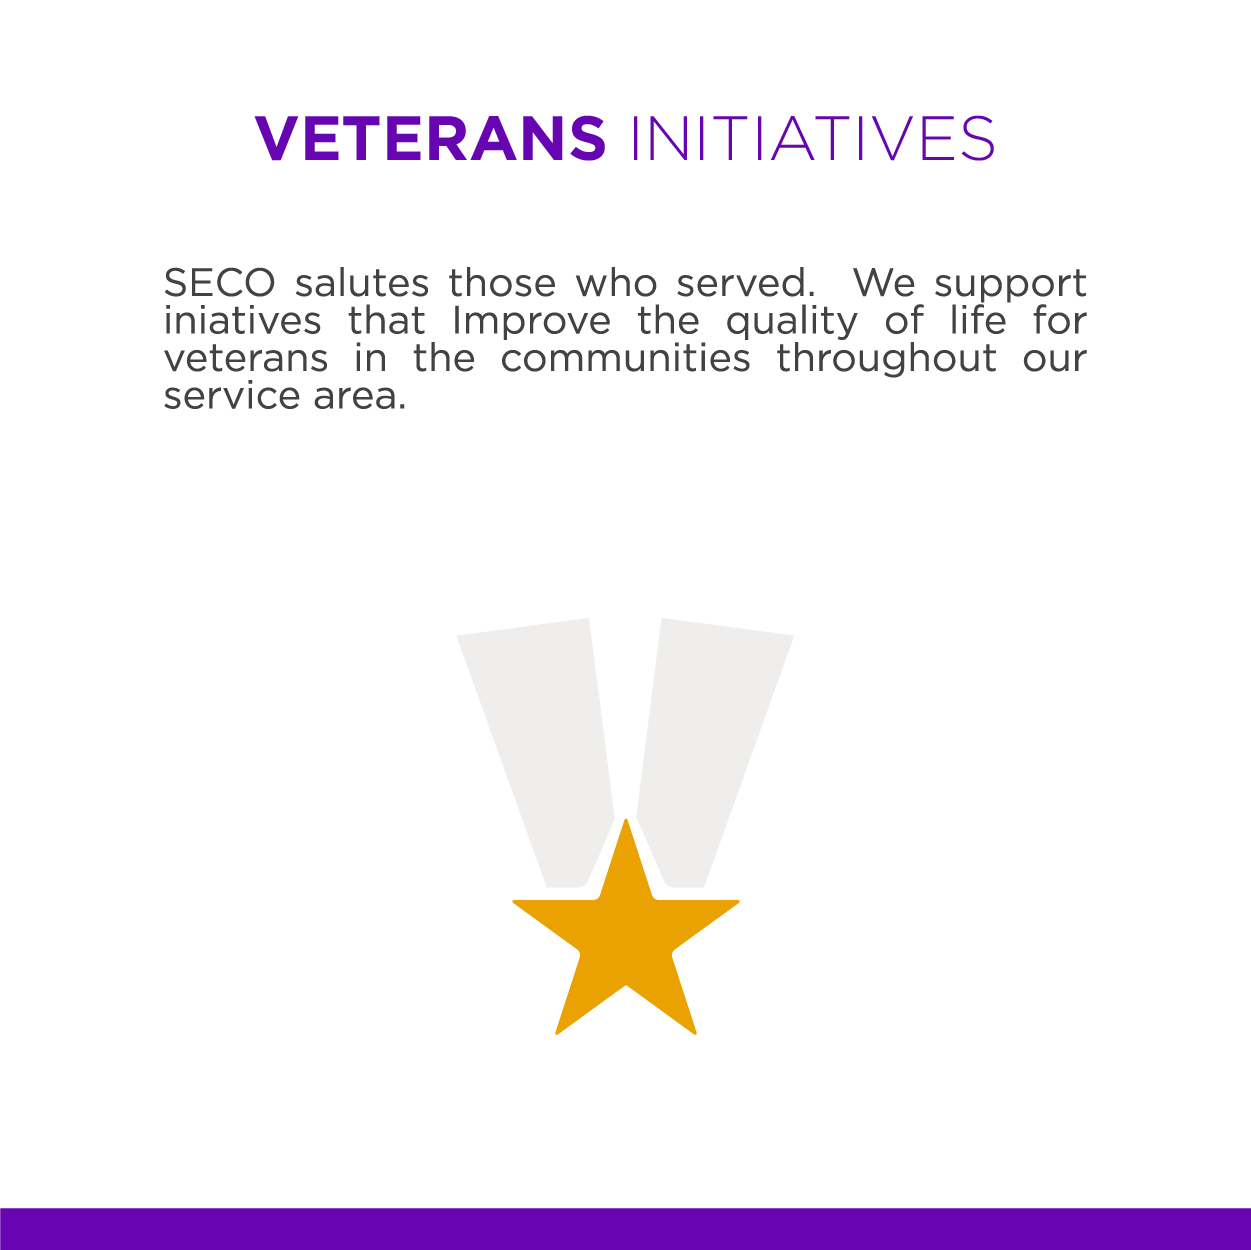 Veterans Initiatives SECO salutes those who served. We support initiatives that improve the quality of life for veterans in the communities throughout our service area.